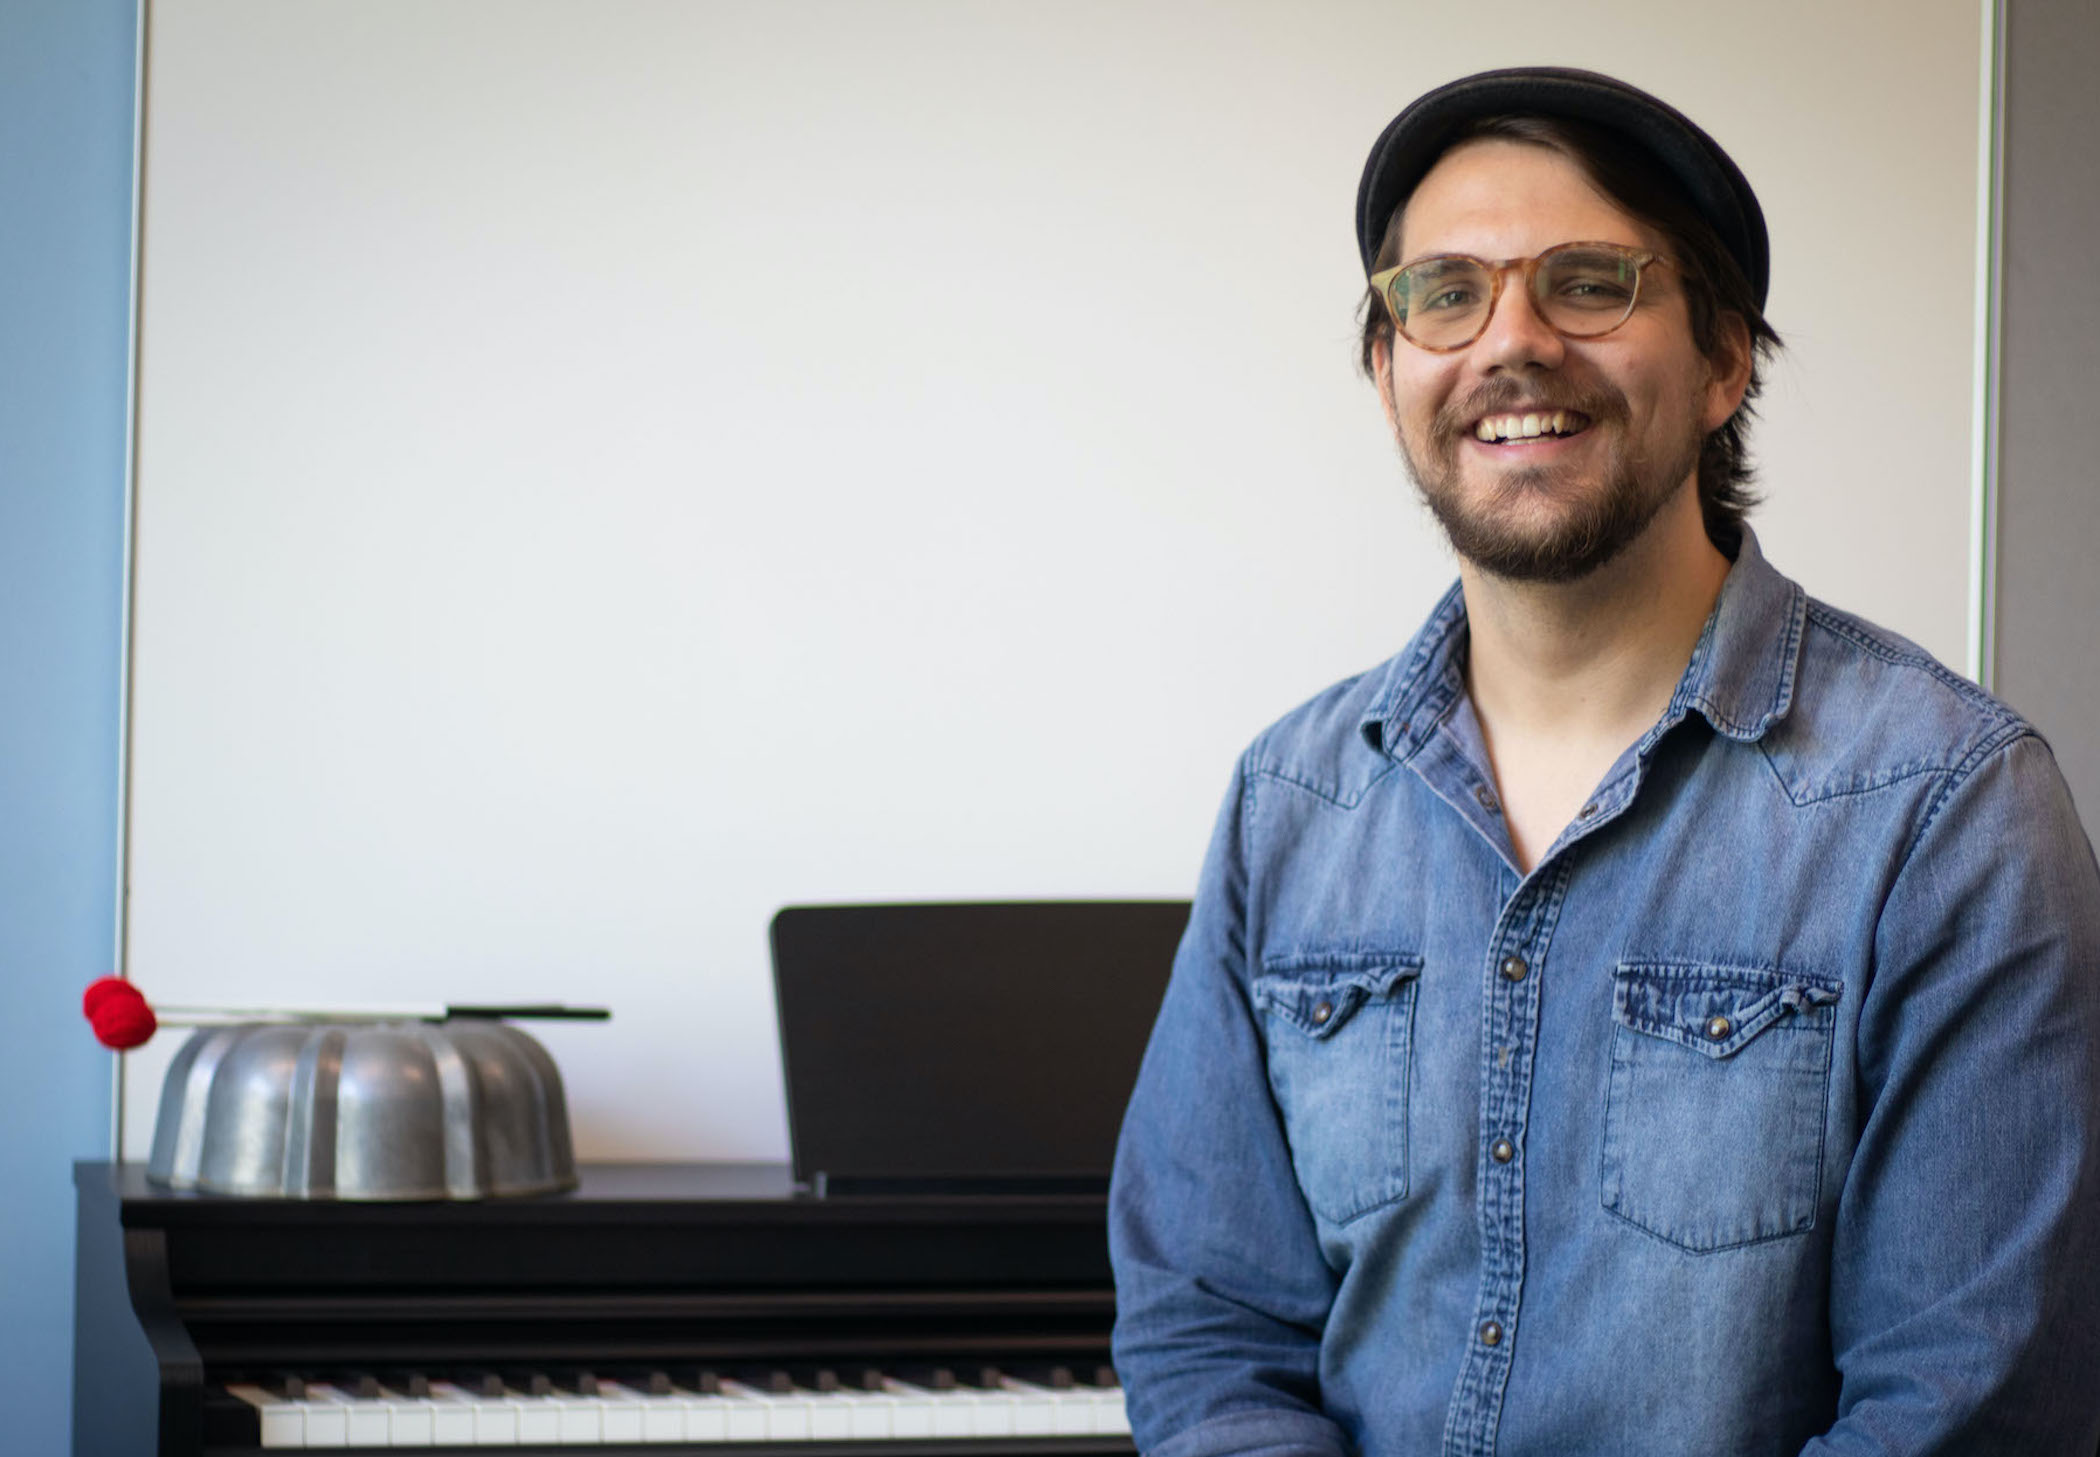 Man sitting to the right side of photo, wearing bark cap, blue denim shirt, glasses, smiling, in front of a keyboard